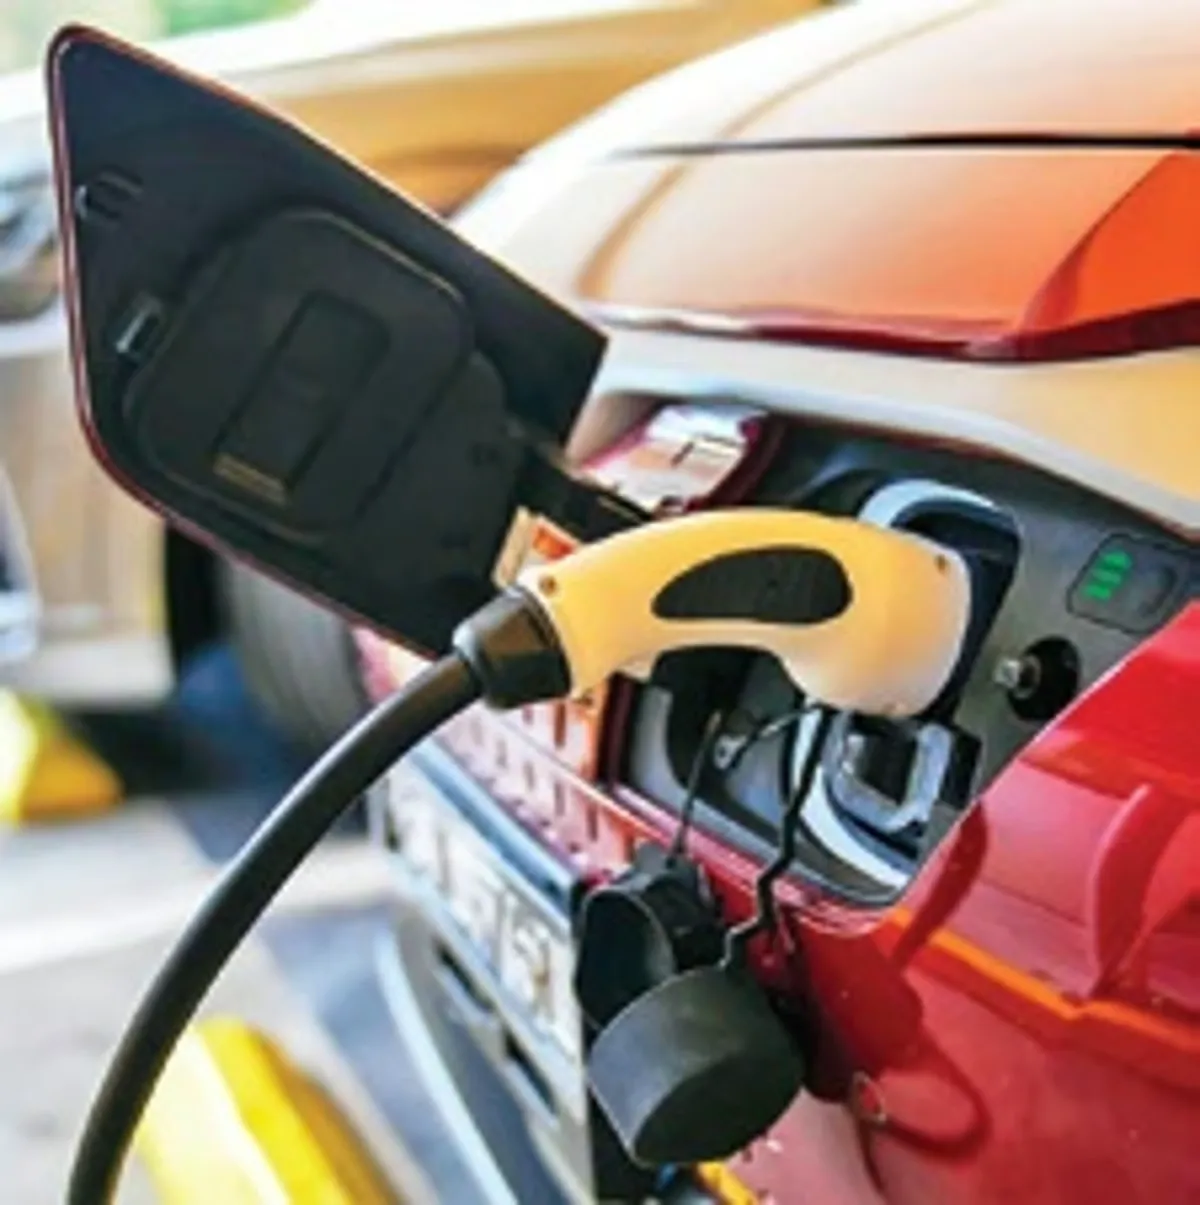 When it comes to EV charging stations, Karnataka leads